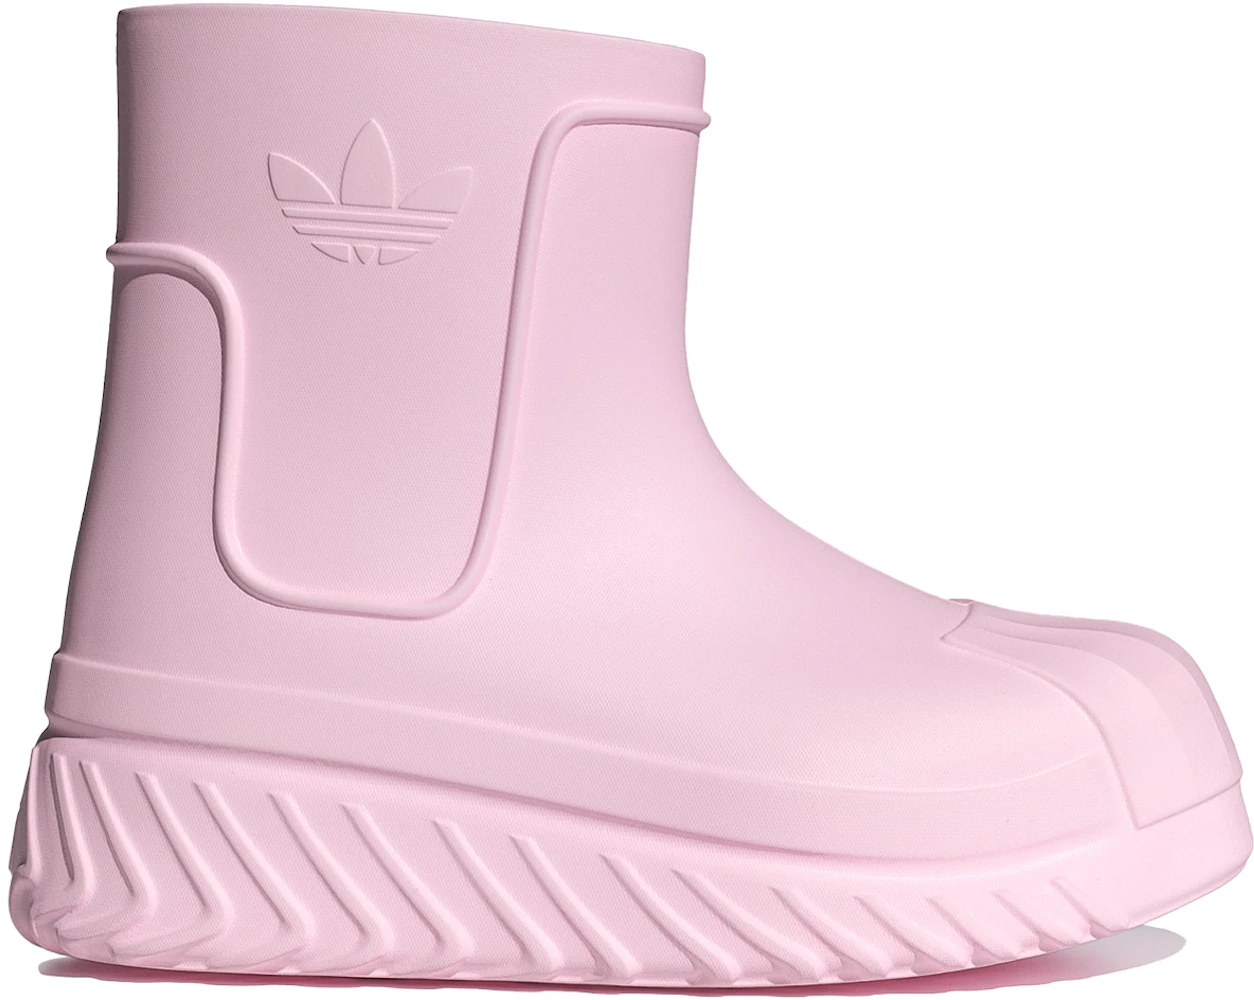 adidas adiFOM Superstar Boot Clear Pink (Women's) - IE0389 - US